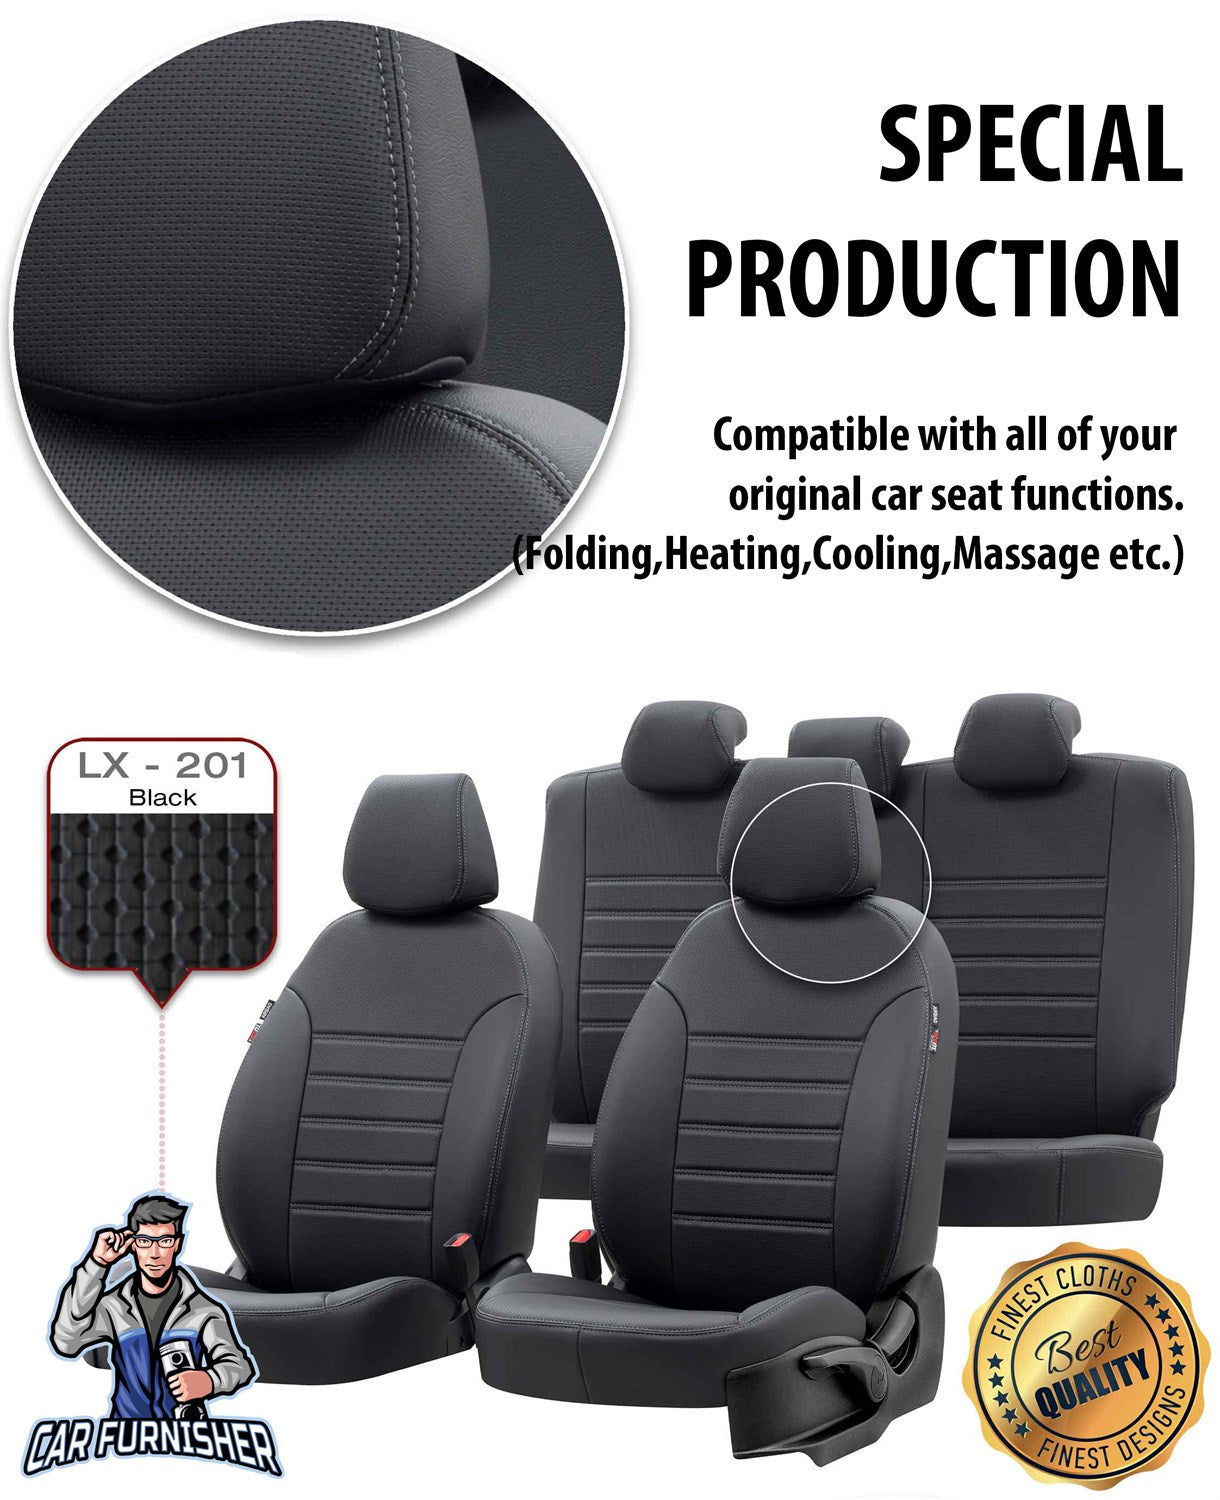 Chevrolet Cruze Car Seat Covers 2009-2016 New York Design Smoked Full Set (5 Seats + Handrest) Leather & Fabric